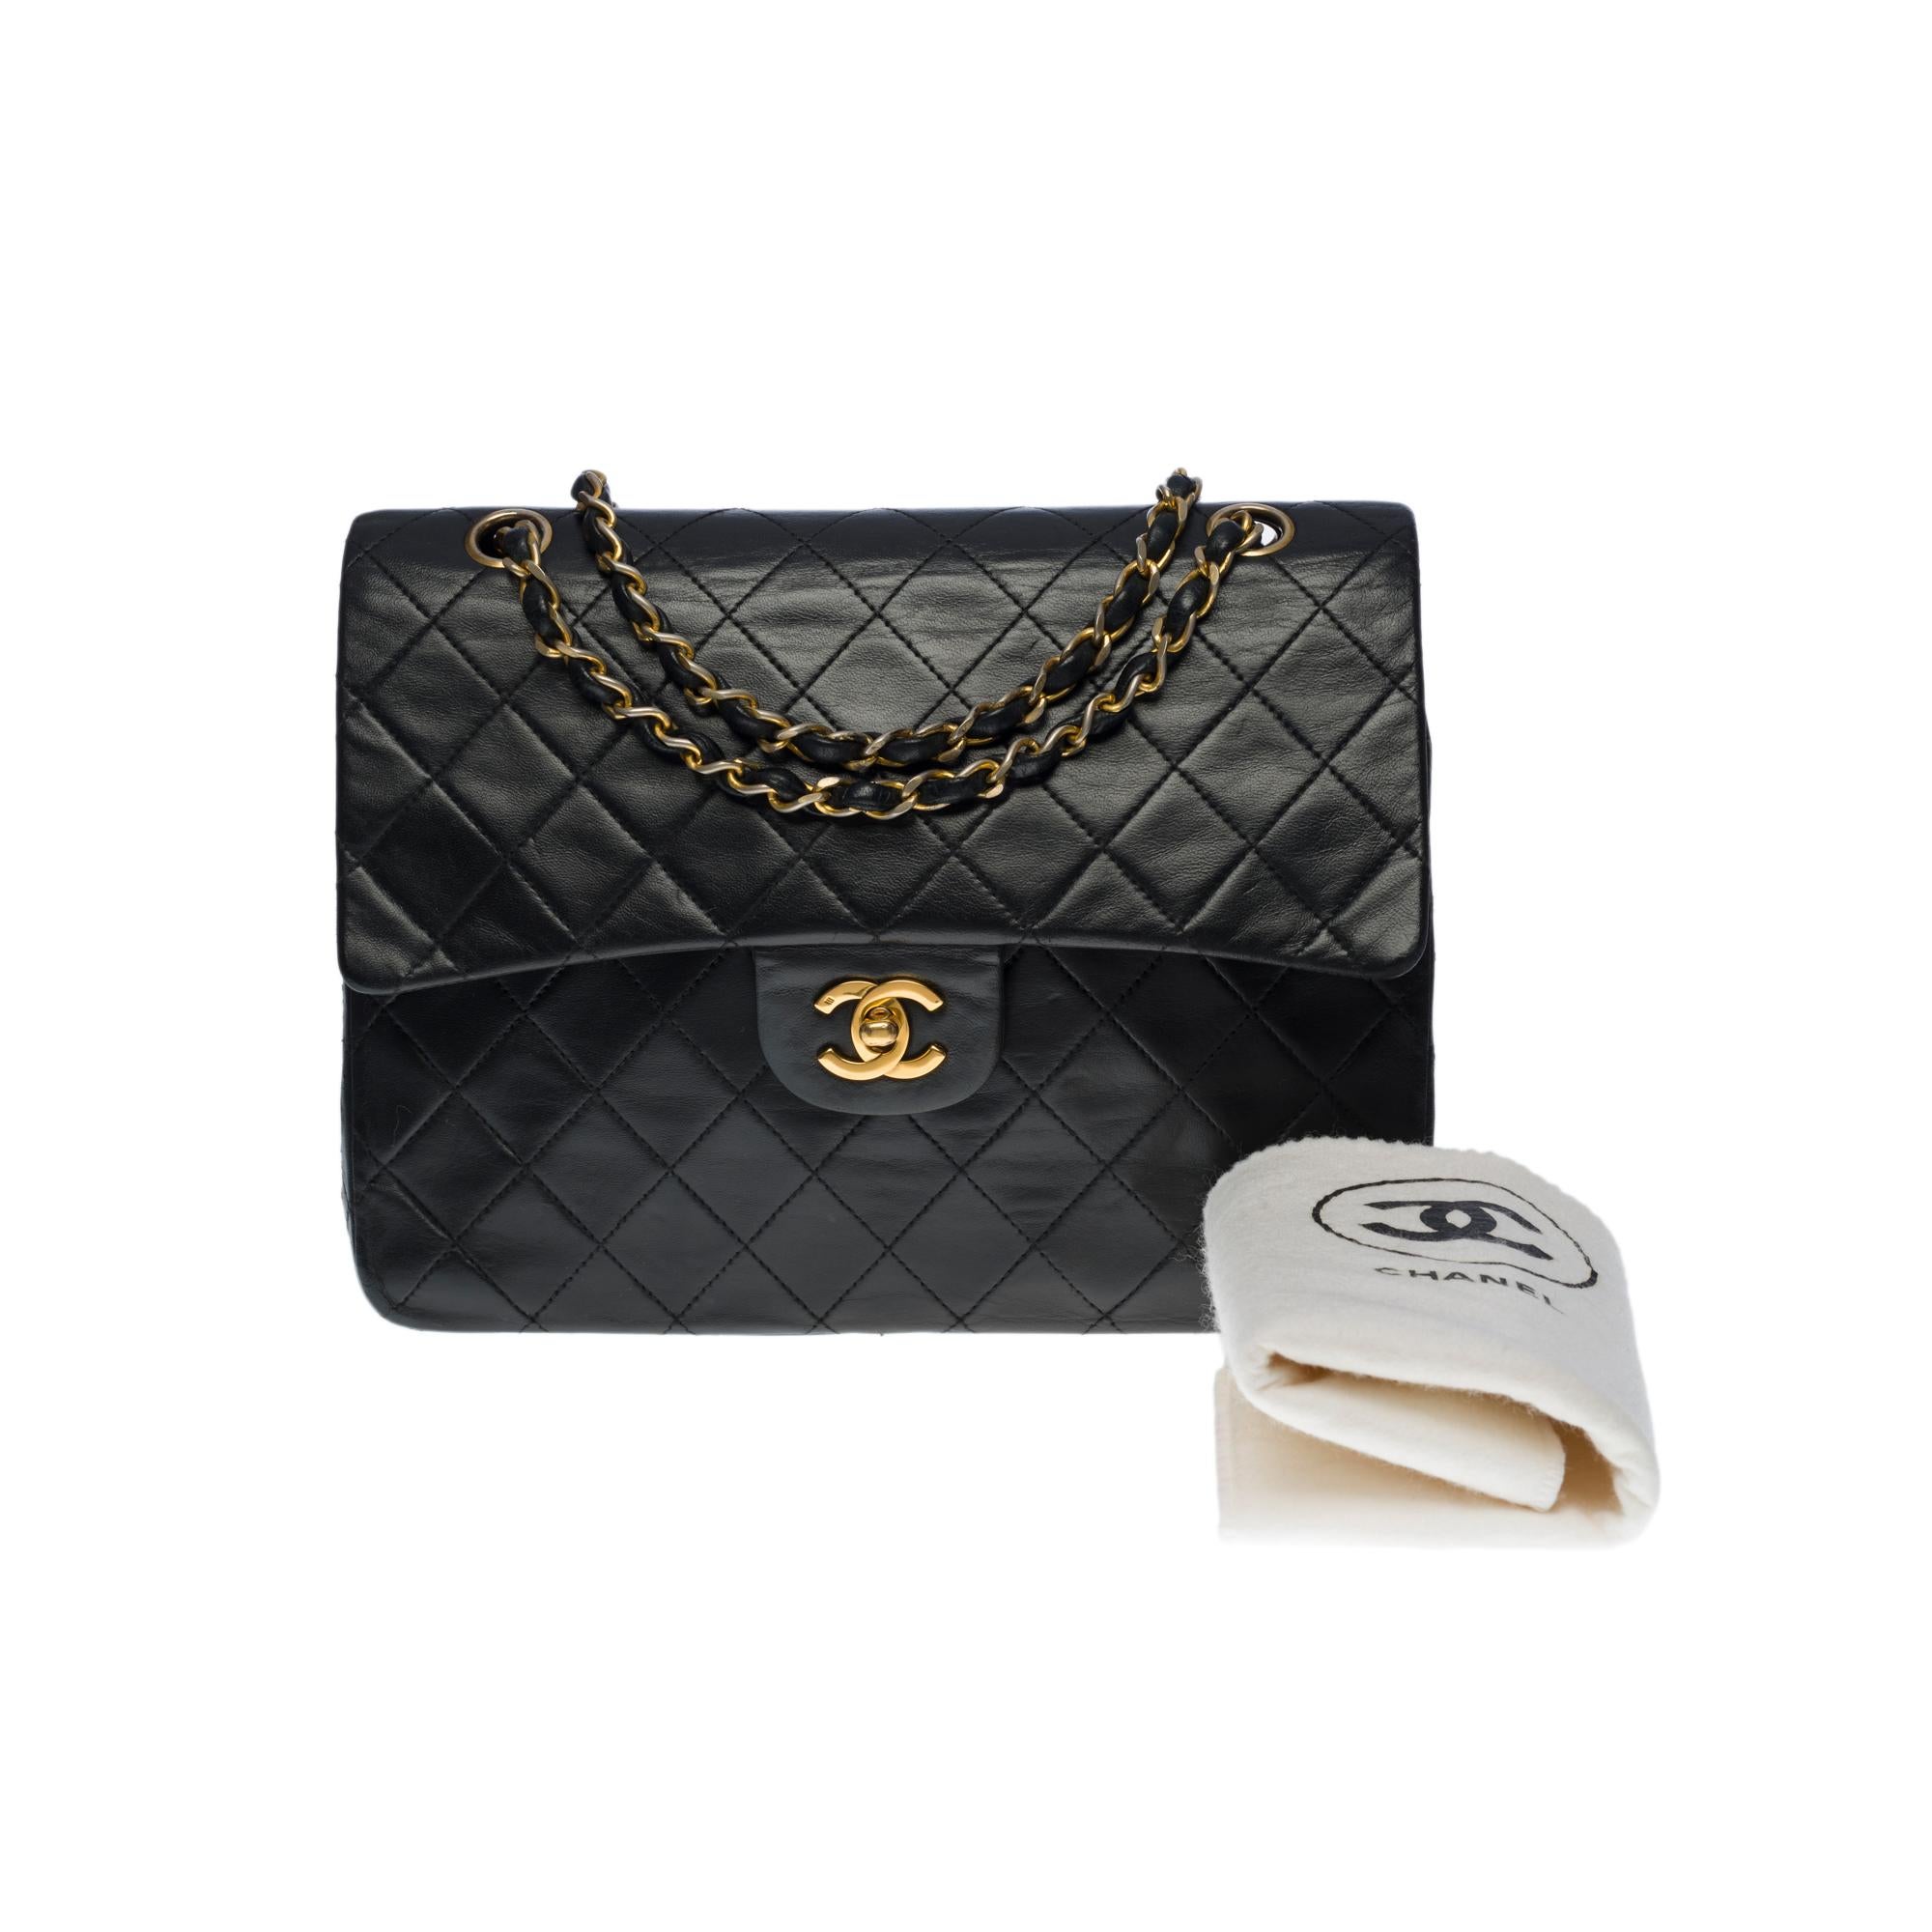 Chanel Timeless medium 25 cm bag with double flap in black quilted leather, GHW For Sale 7